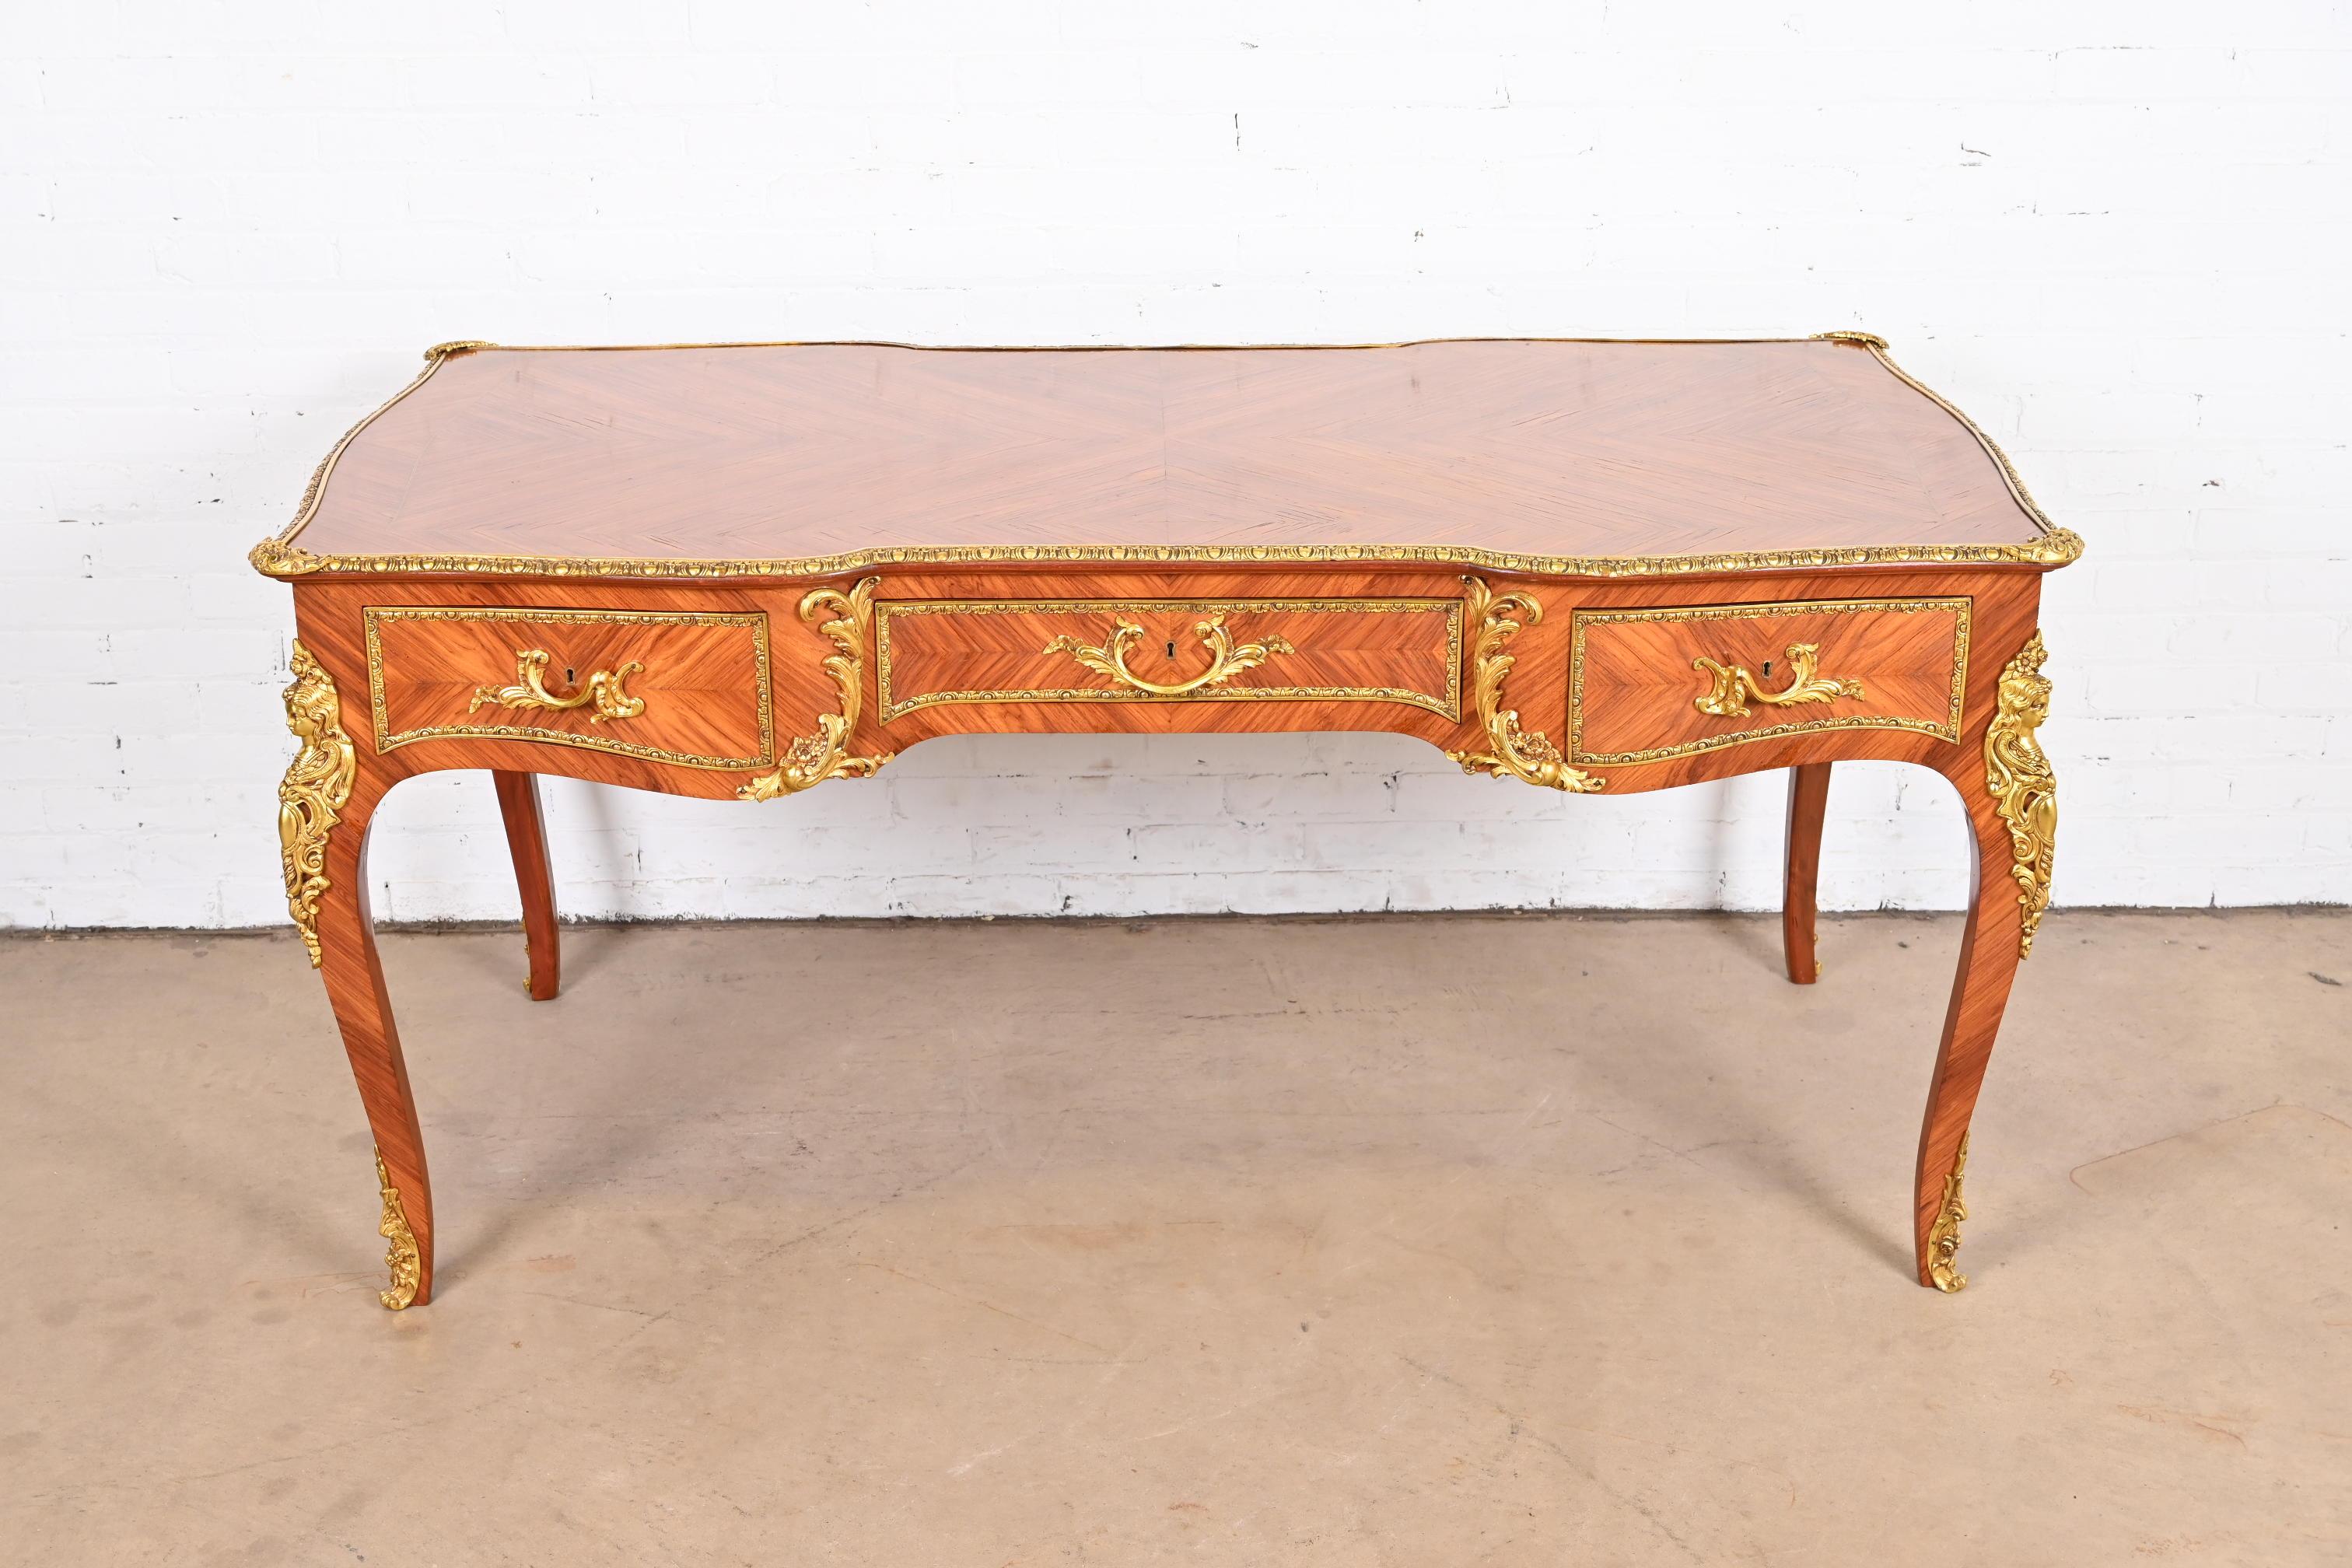 A gorgeous French Louis XV style executive writing desk or bureau plat desk

France, circa Mid-20th century

Beautiful book-matched kingwood, with mounted gilt bronze ormolu and hardware.

Measures: 66.5